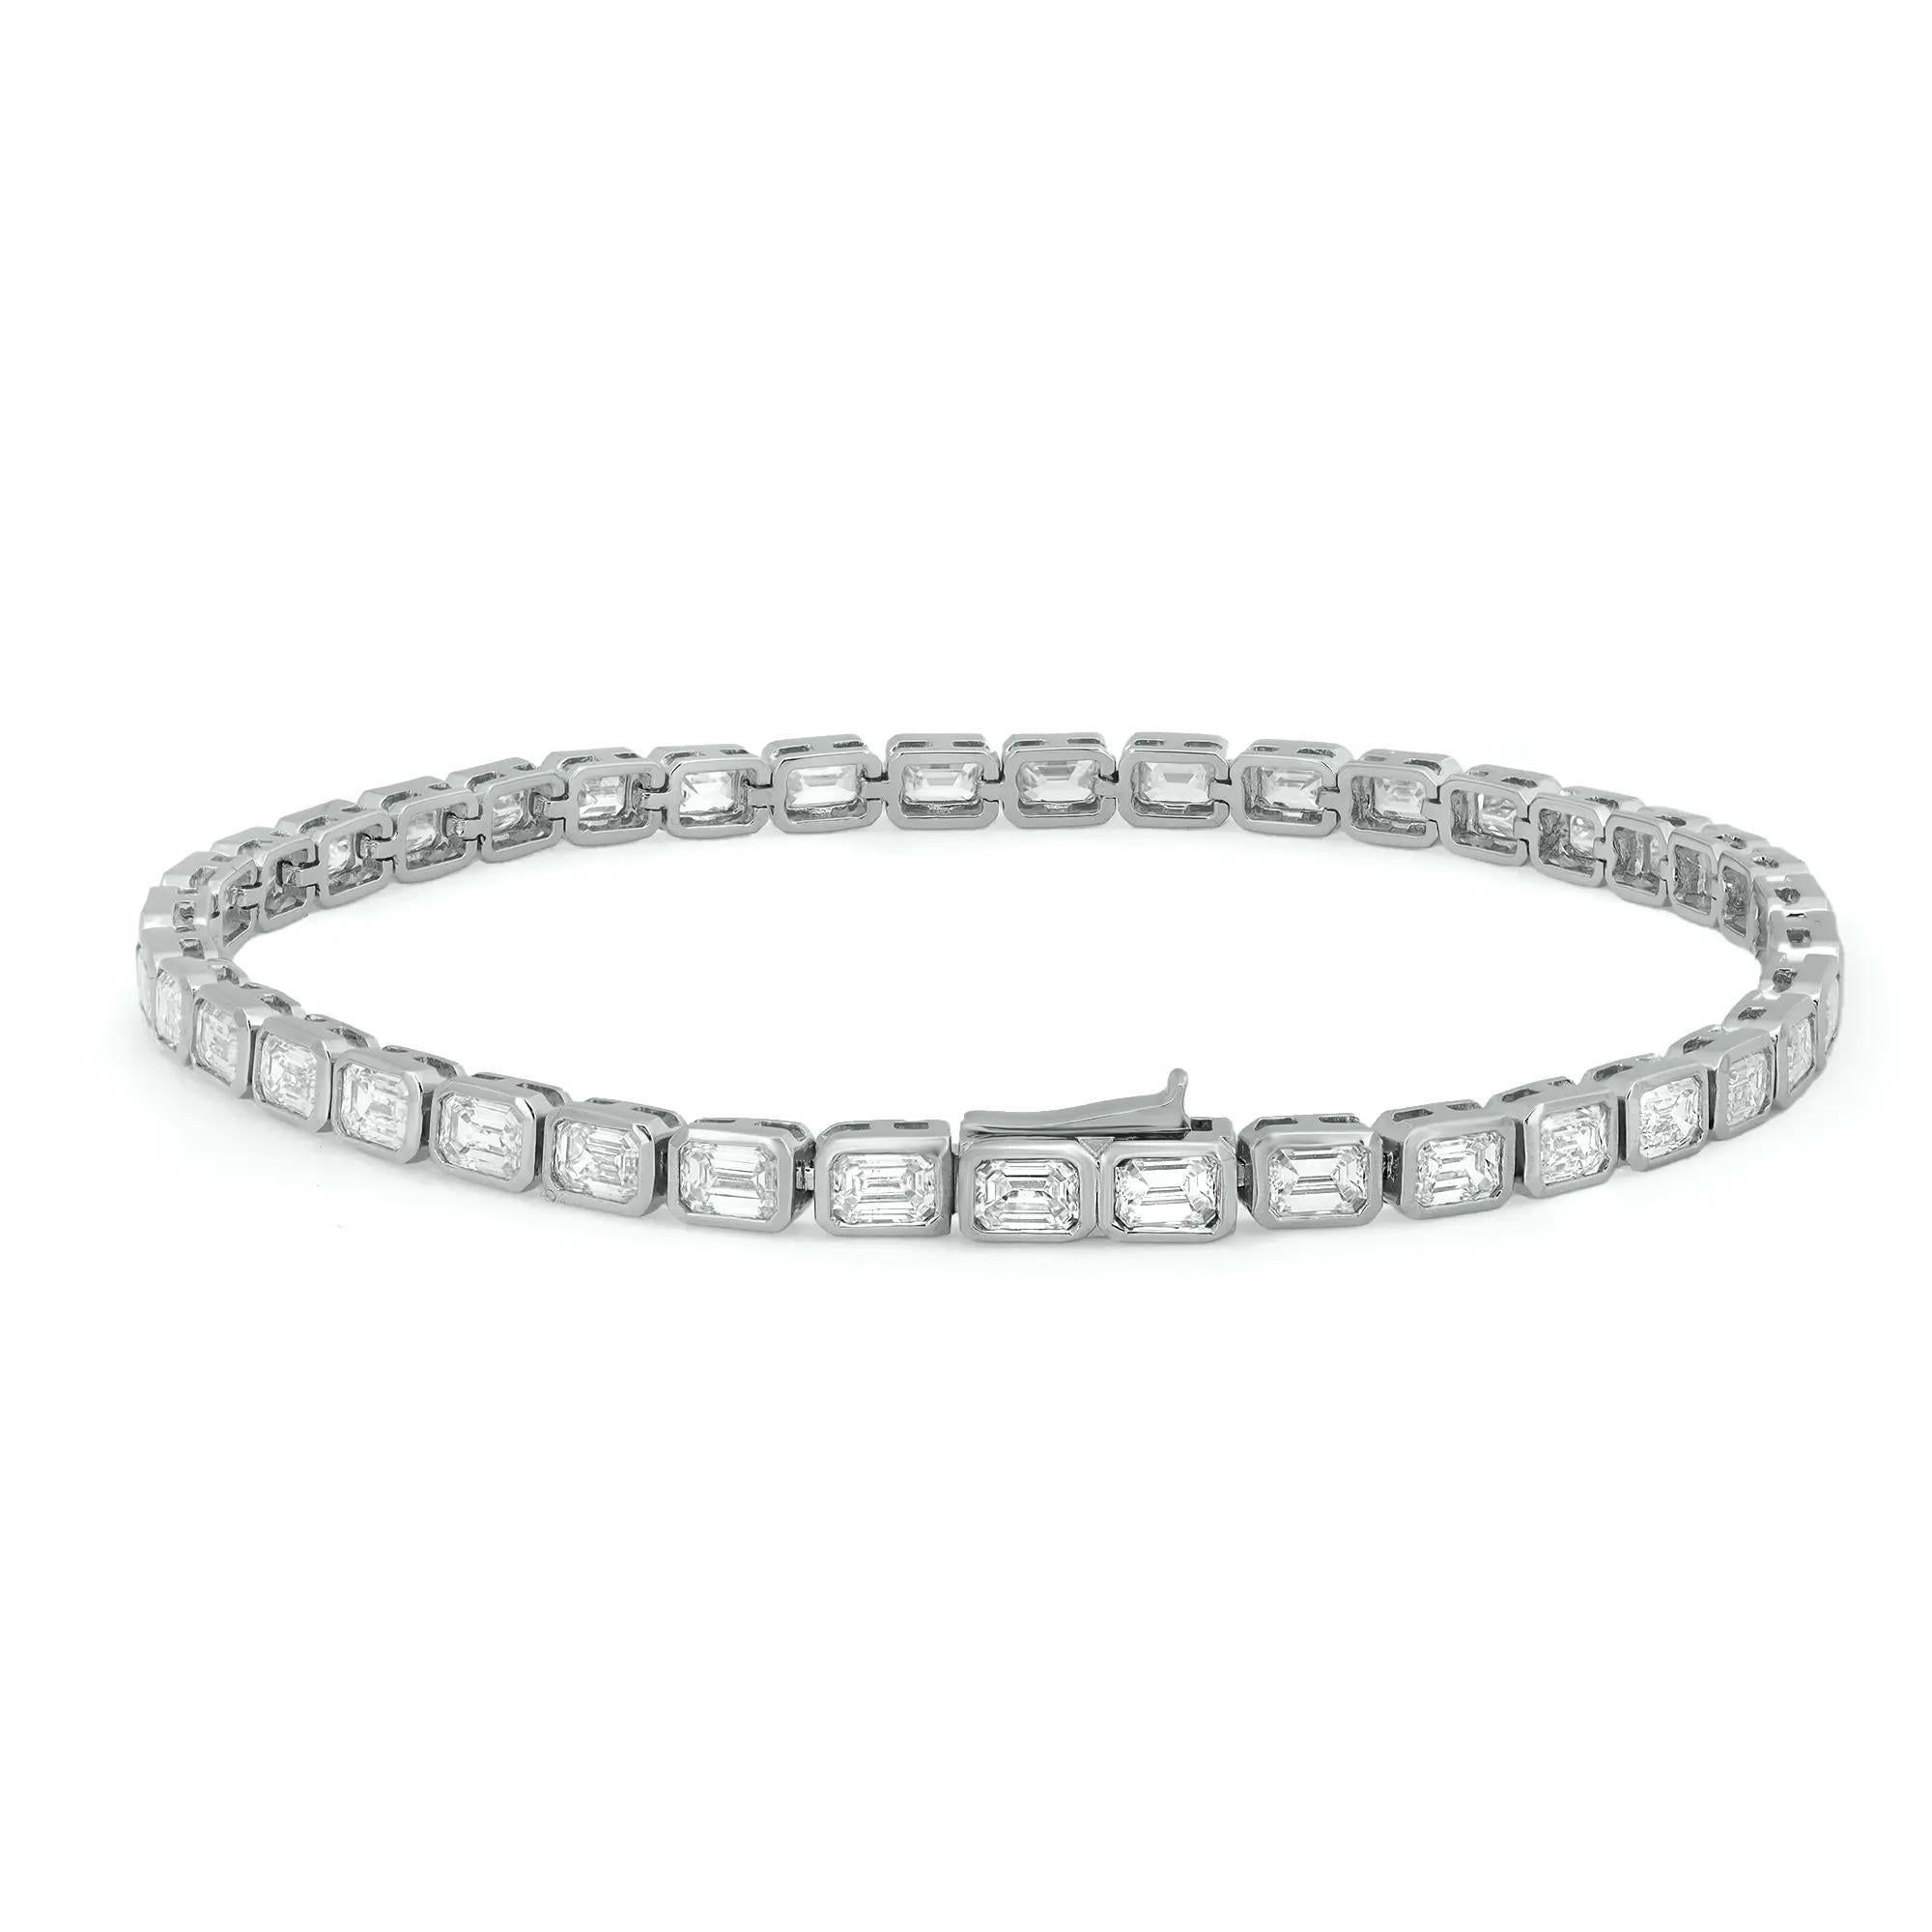 Classic yet elegant, this breathtaking tennis bracelet is crafted in 18K white gold with 39 bezel set dazzling emerald cut diamonds. Total diamond weight: 5.48 carats. The bright white diamonds are G-H color and VS-SI clarity. Bracelet length: 7